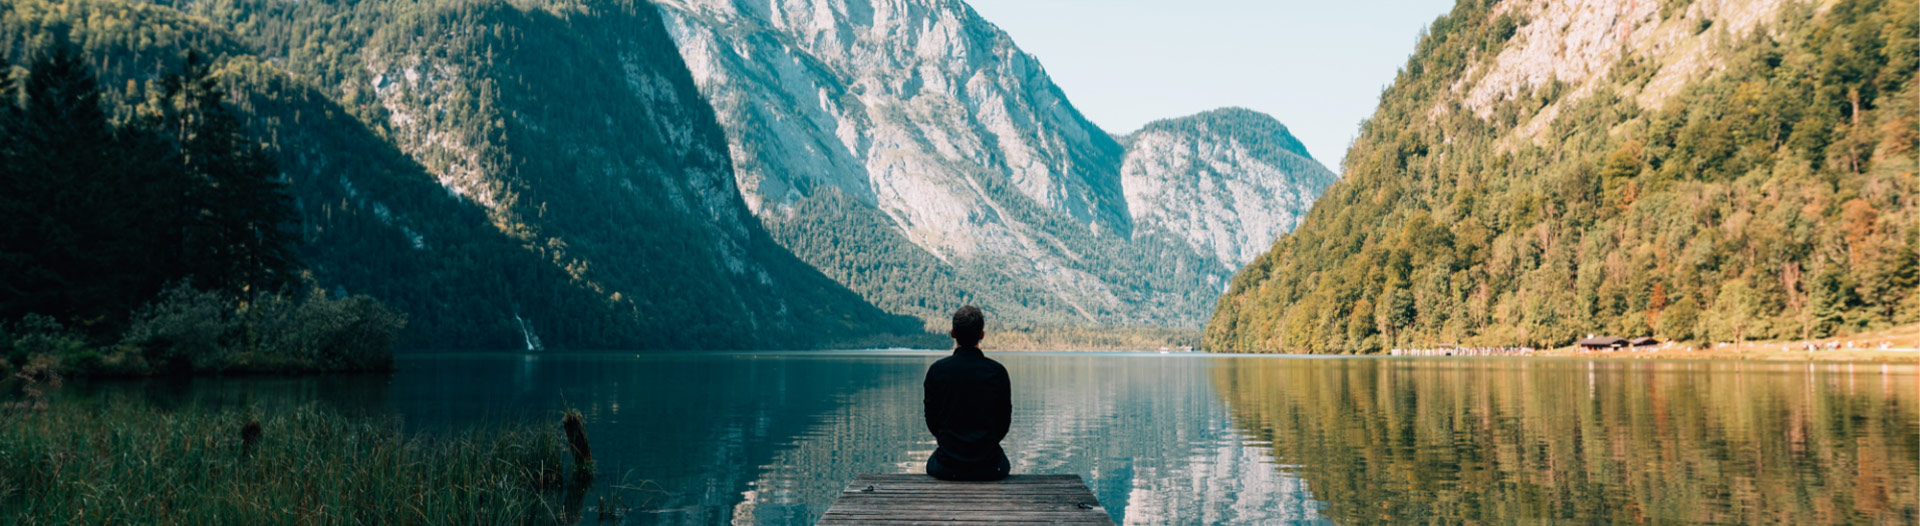 Photo of a person sitting at the end of a dock looking thoughtfully out at the distance. The dock extends into a lake in the middle of mountains.